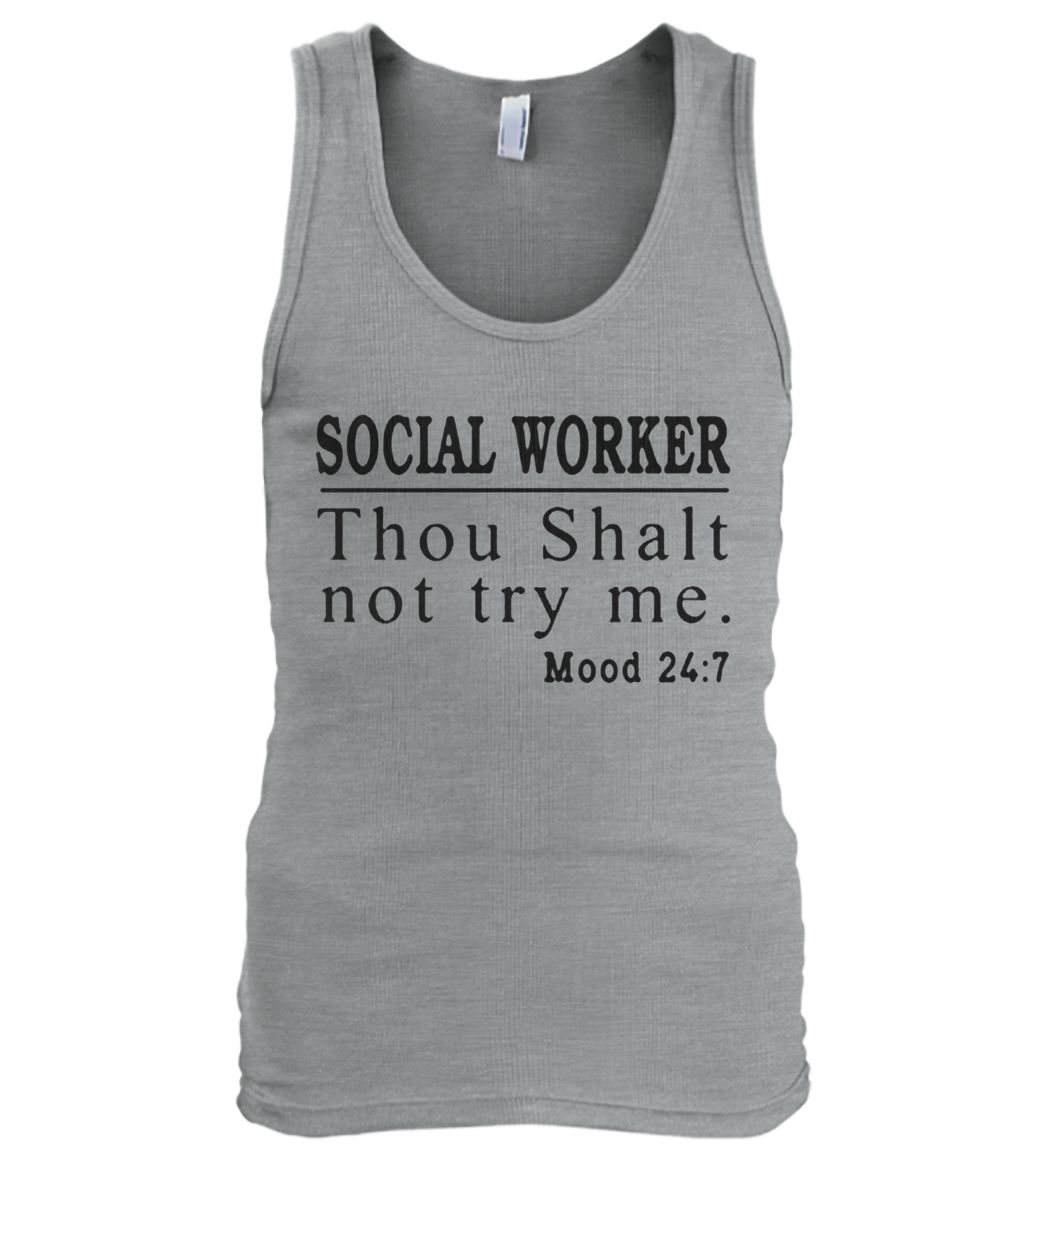 Social worker thou shall not try me mood 247 men's tank top